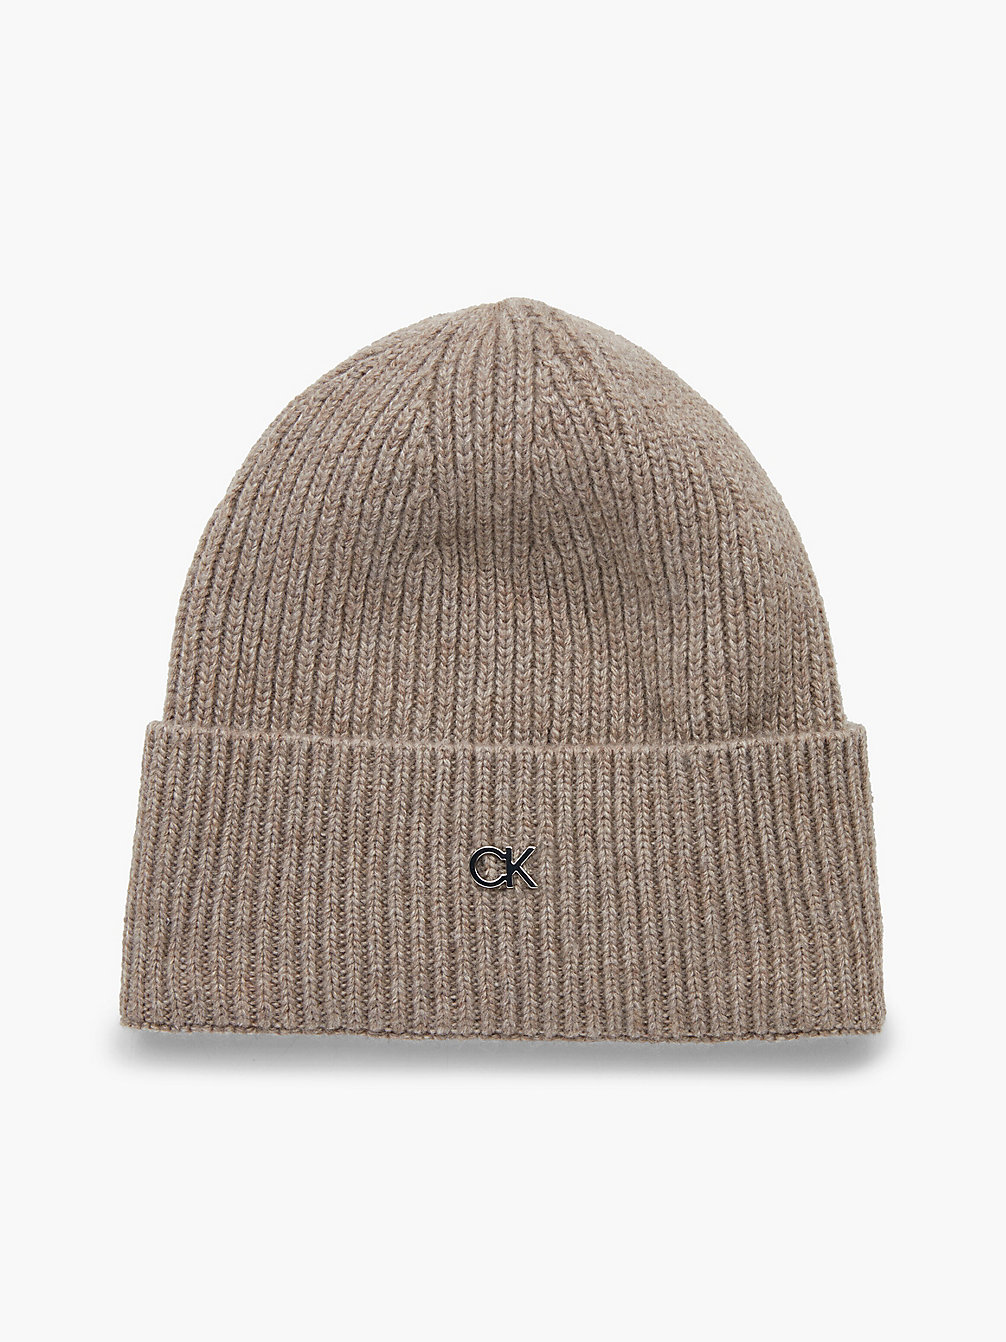 DEEP TAUPE Recycled Knit Beanie undefined women Calvin Klein